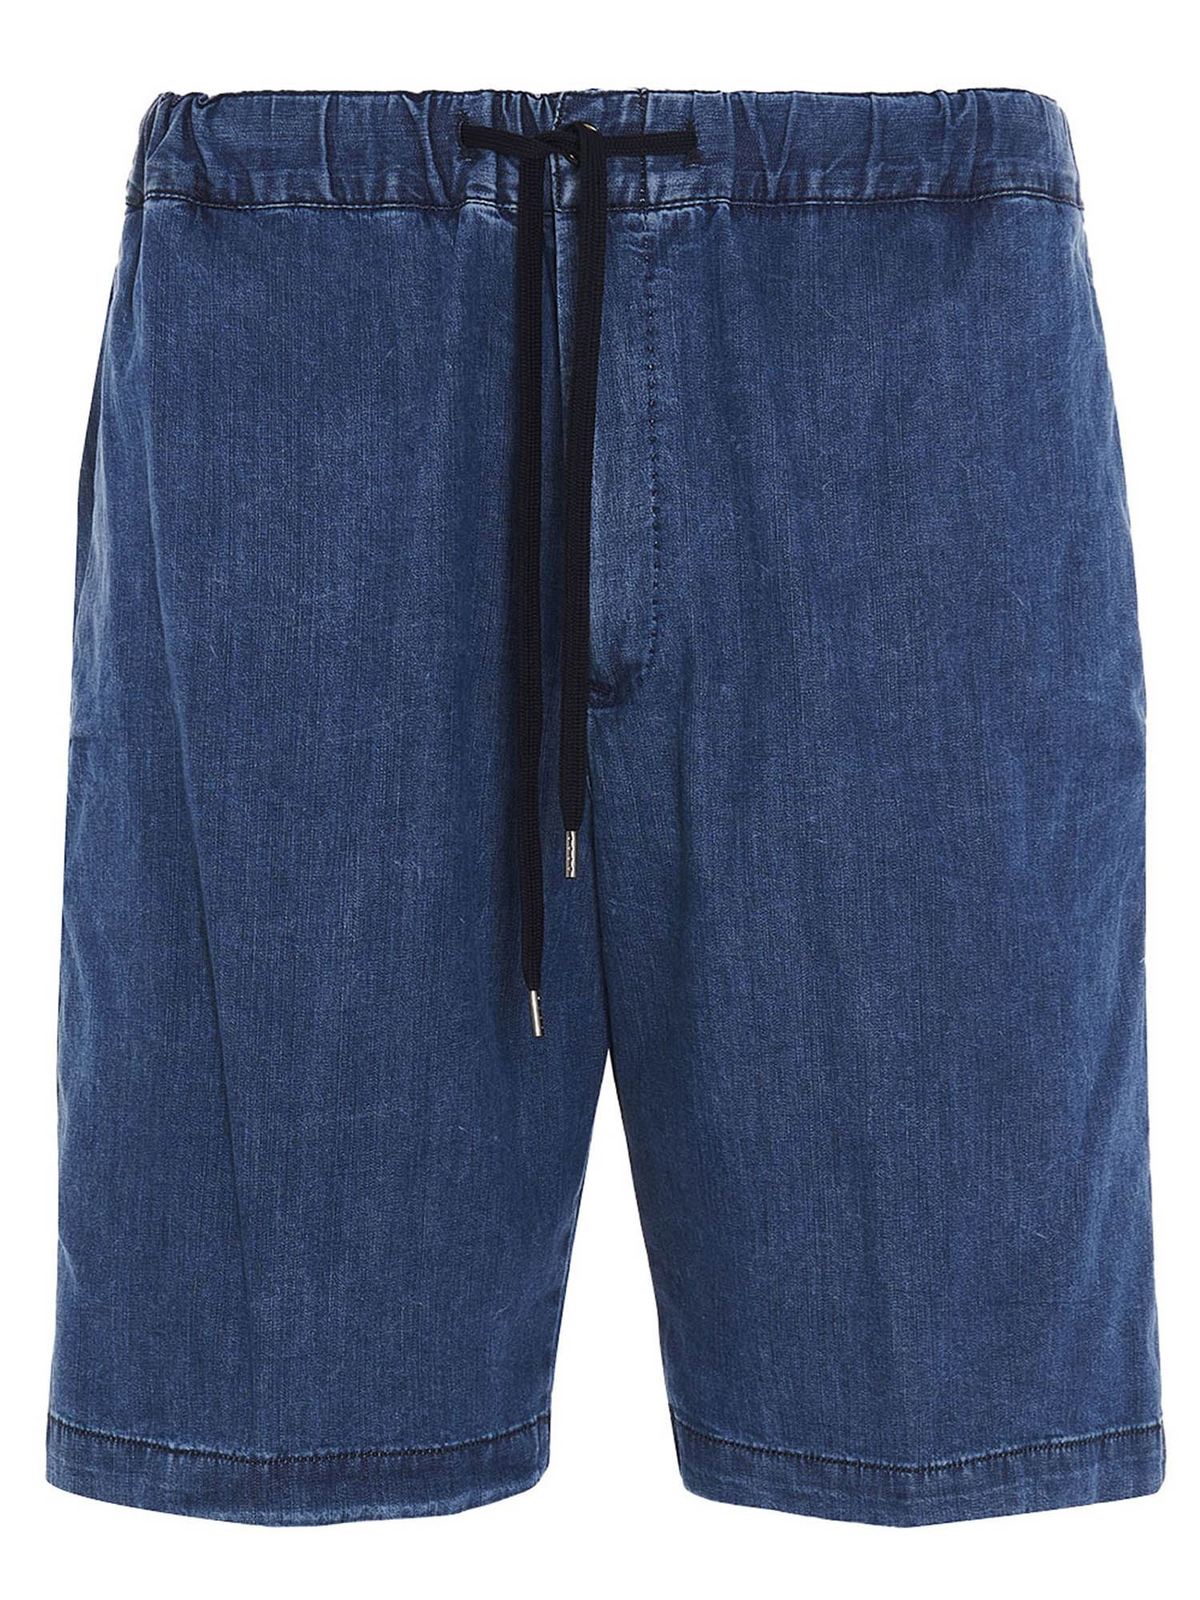 PT TORINO CHAMBRAY SHORTS IN BLUE